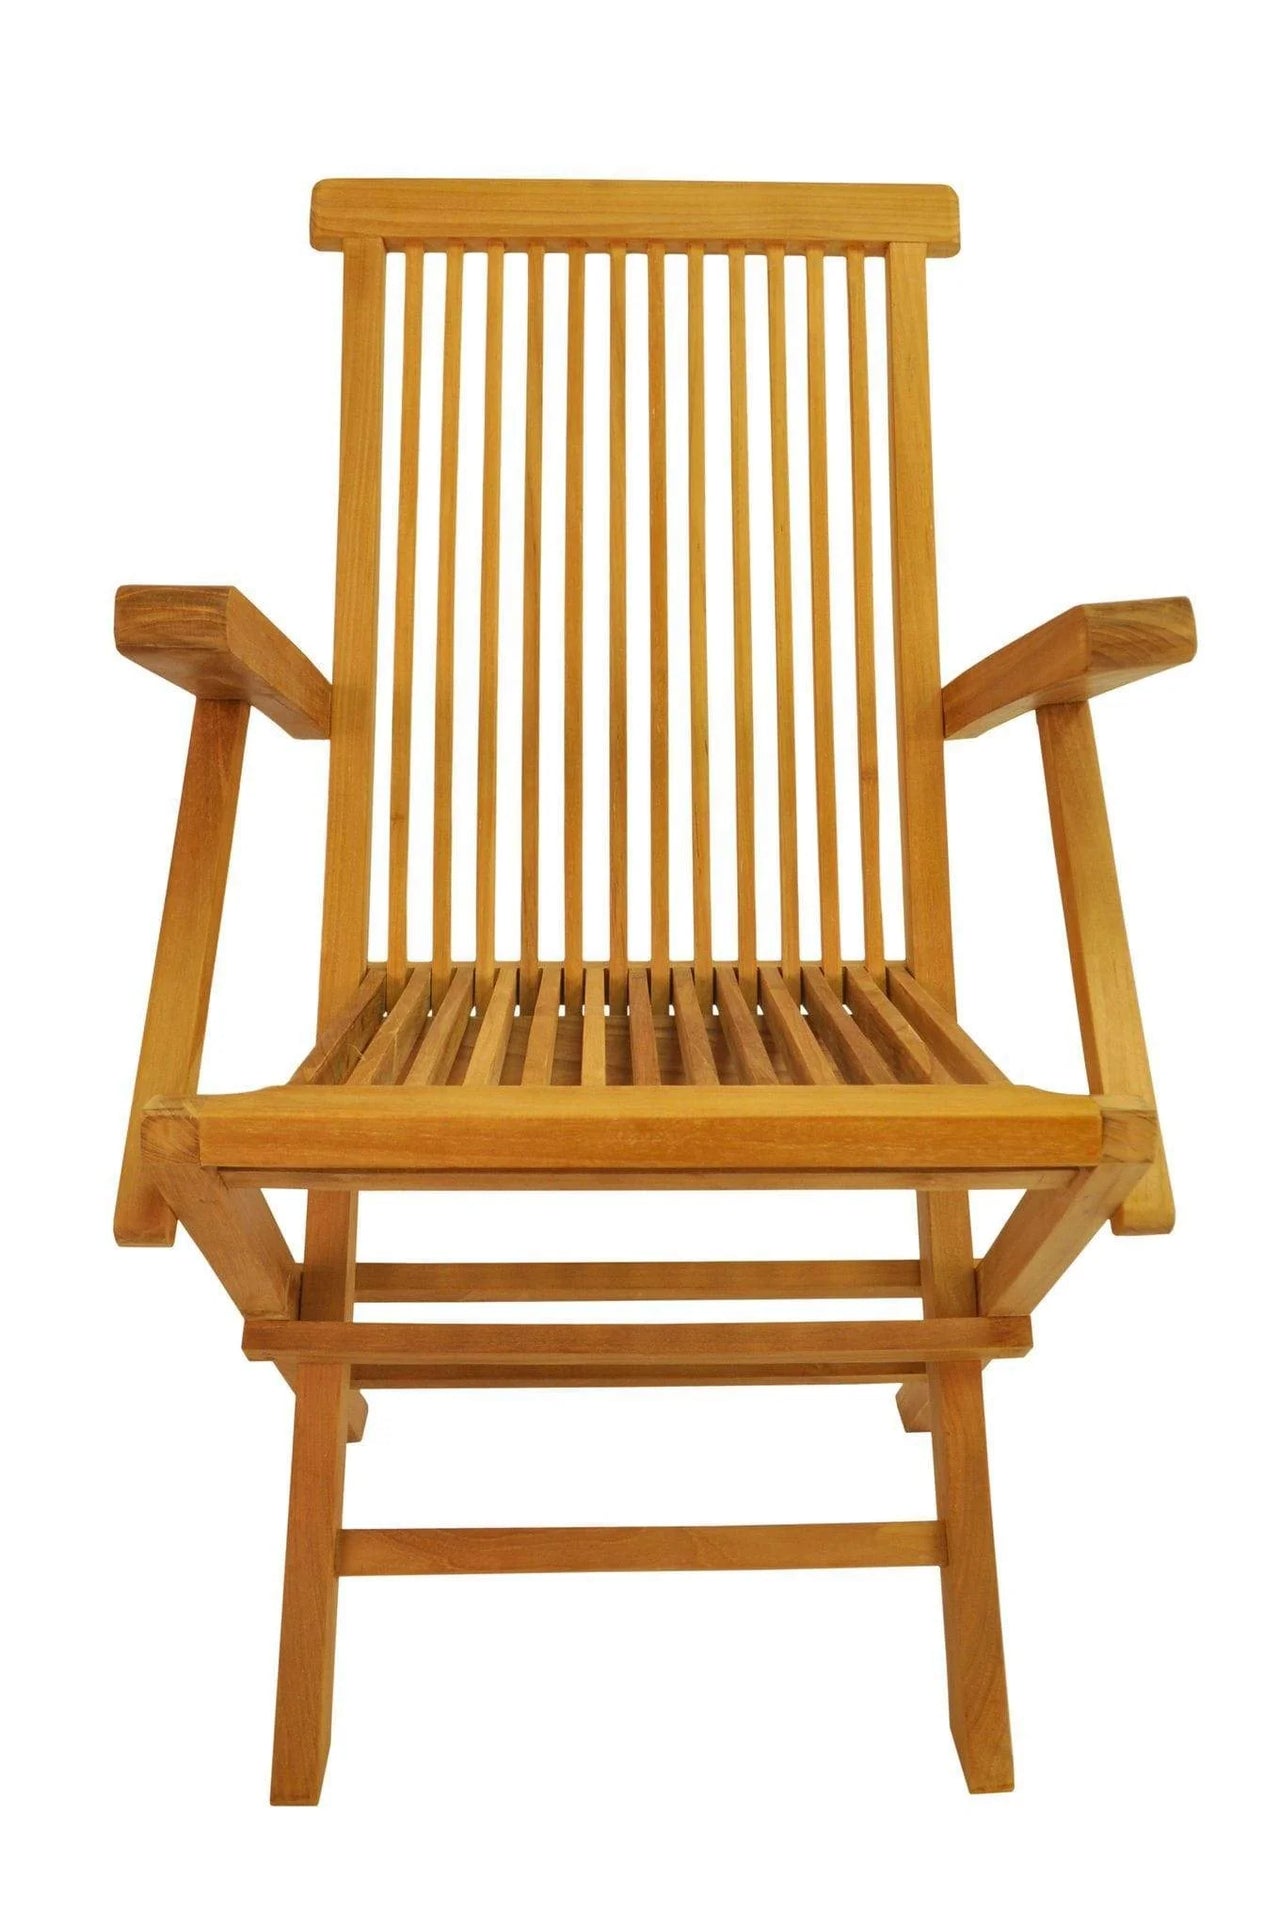 Anderson Teak Classic Folding Armchair (Pair Set of Two Pieces)